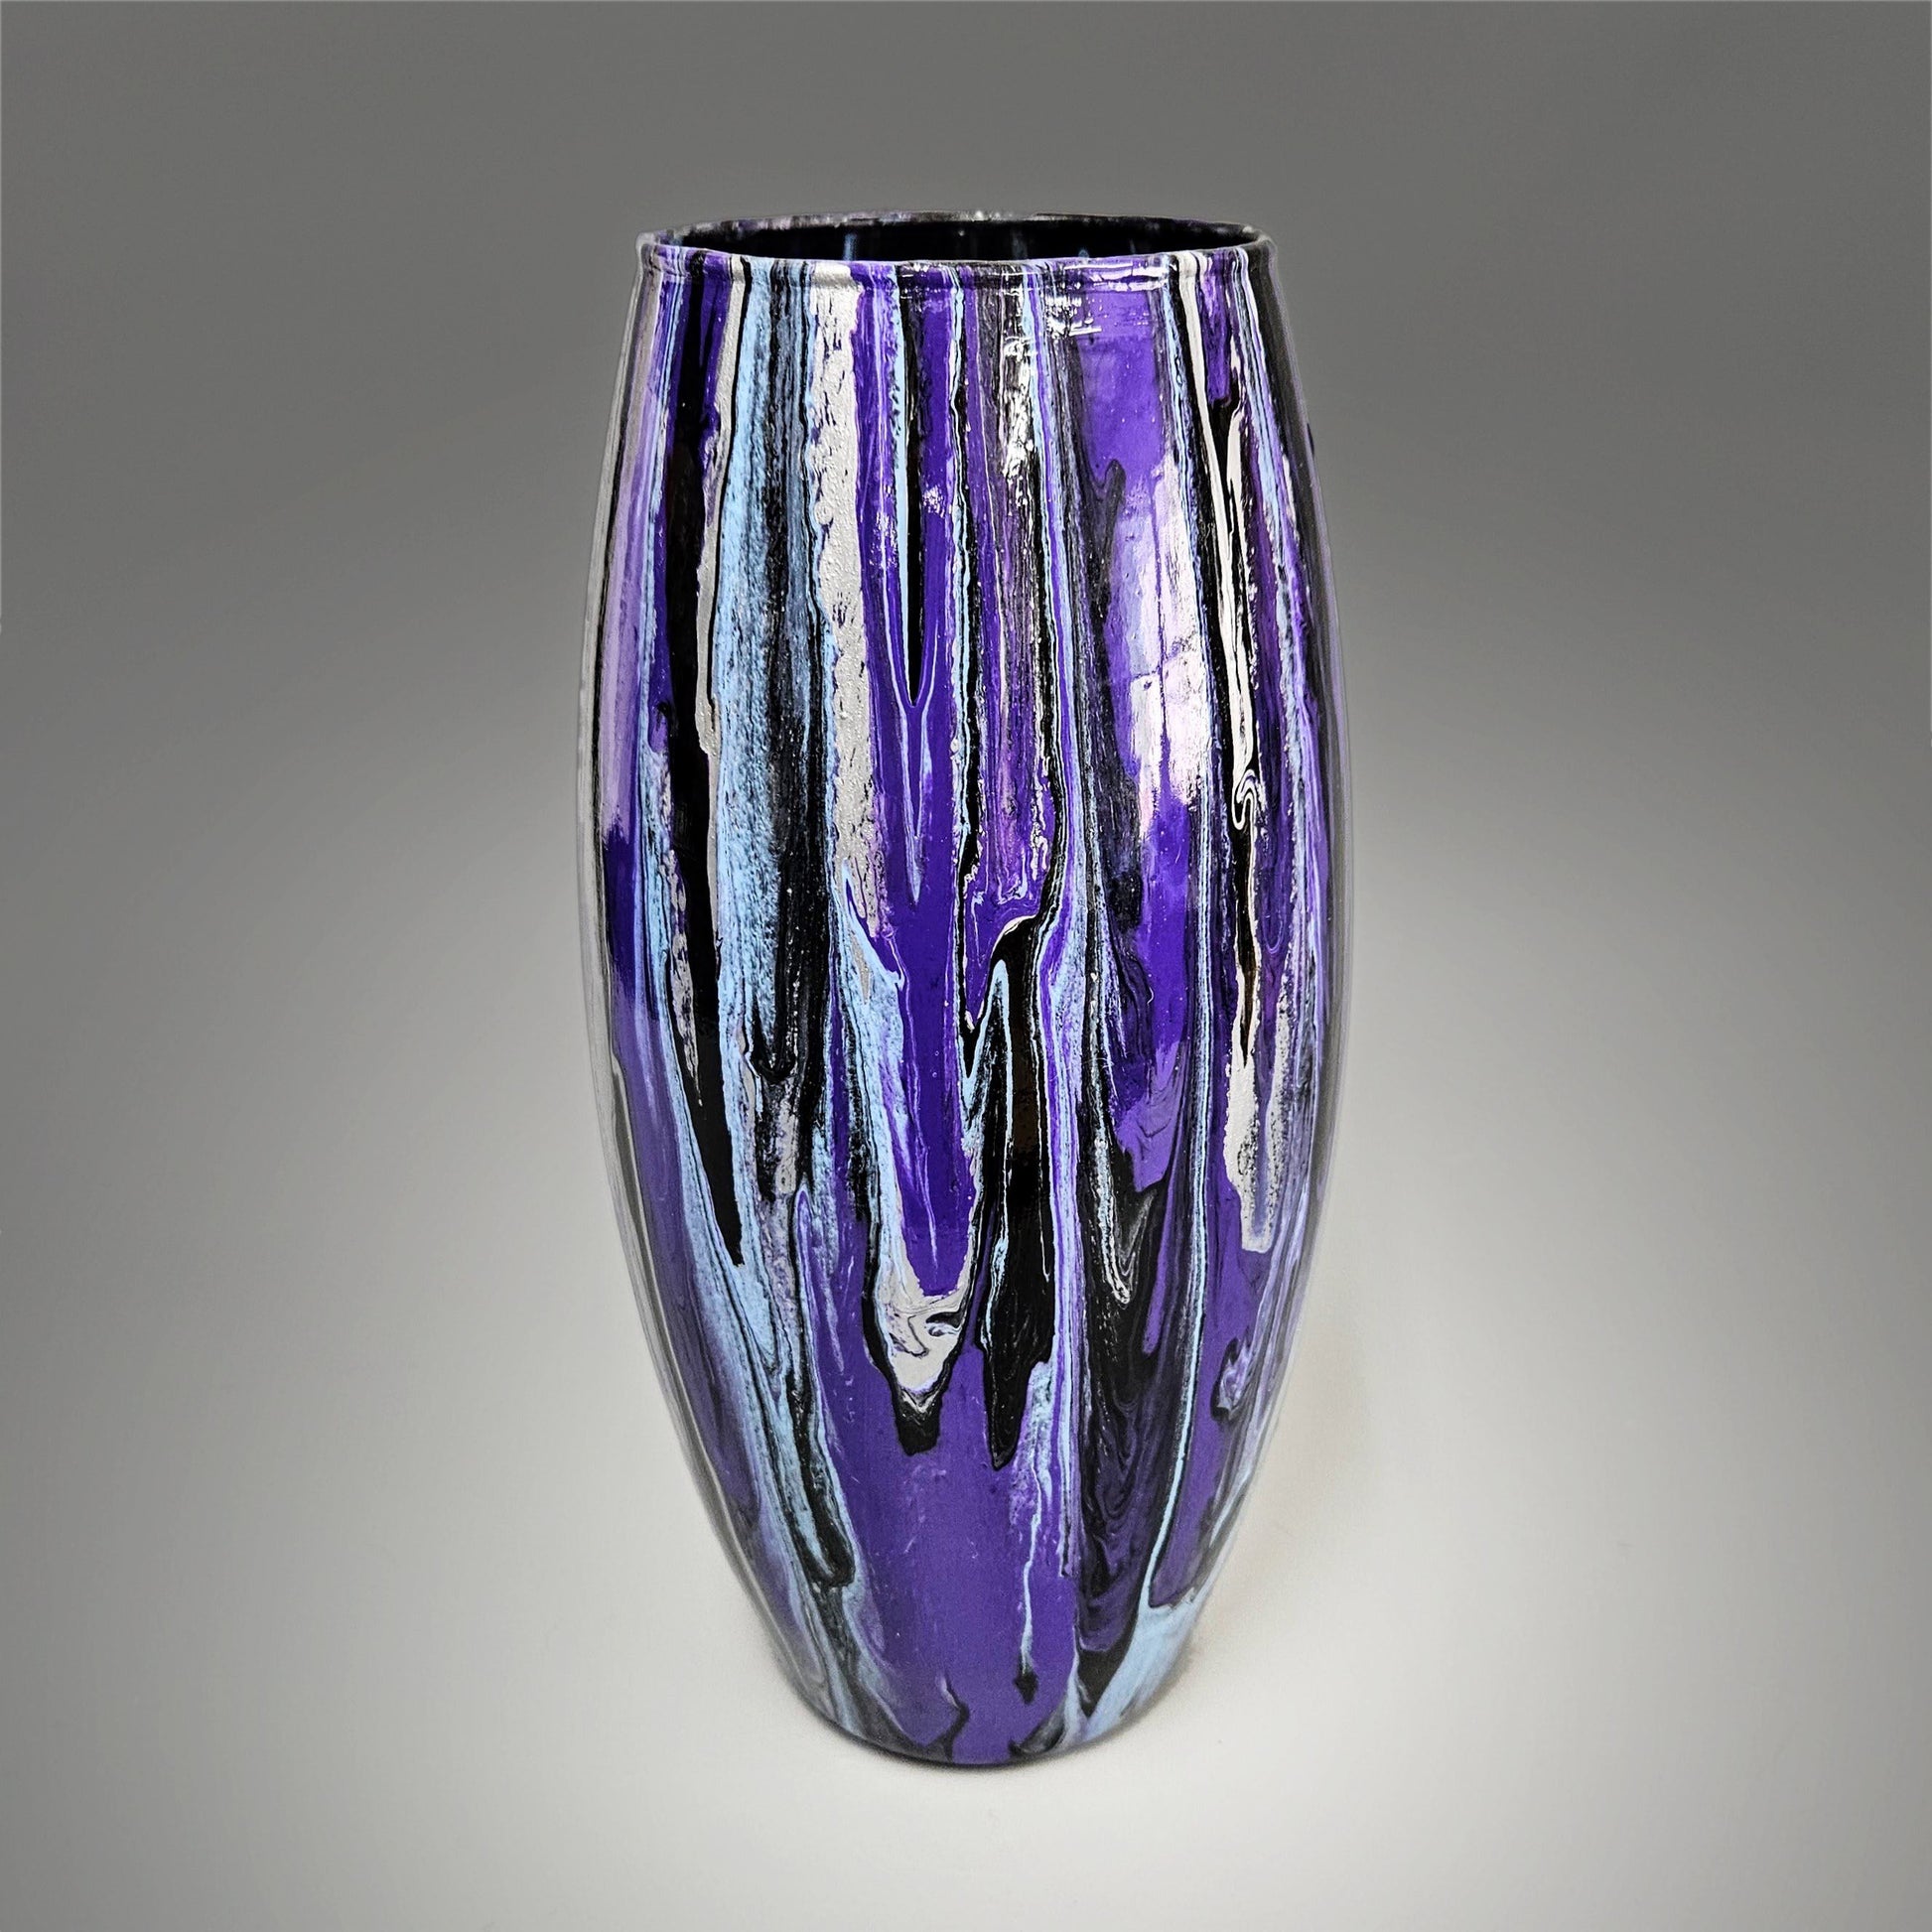 Tall Glass Art Painted Vase in Purple Black and Silver | Handmade Gift